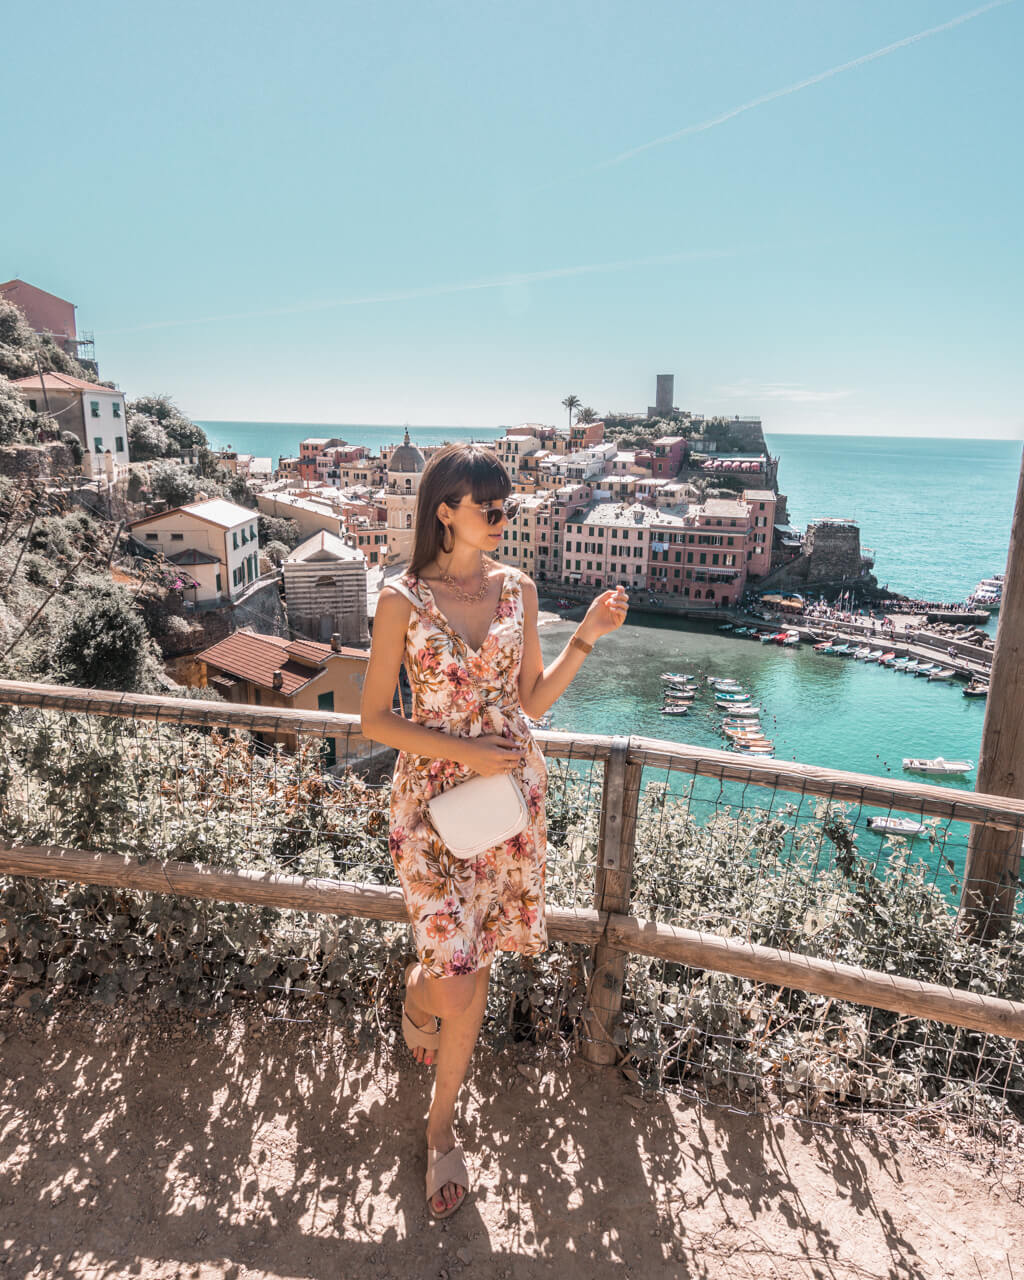 Things to do in Cinque Terre + where to stay and food tips {Photography guide}